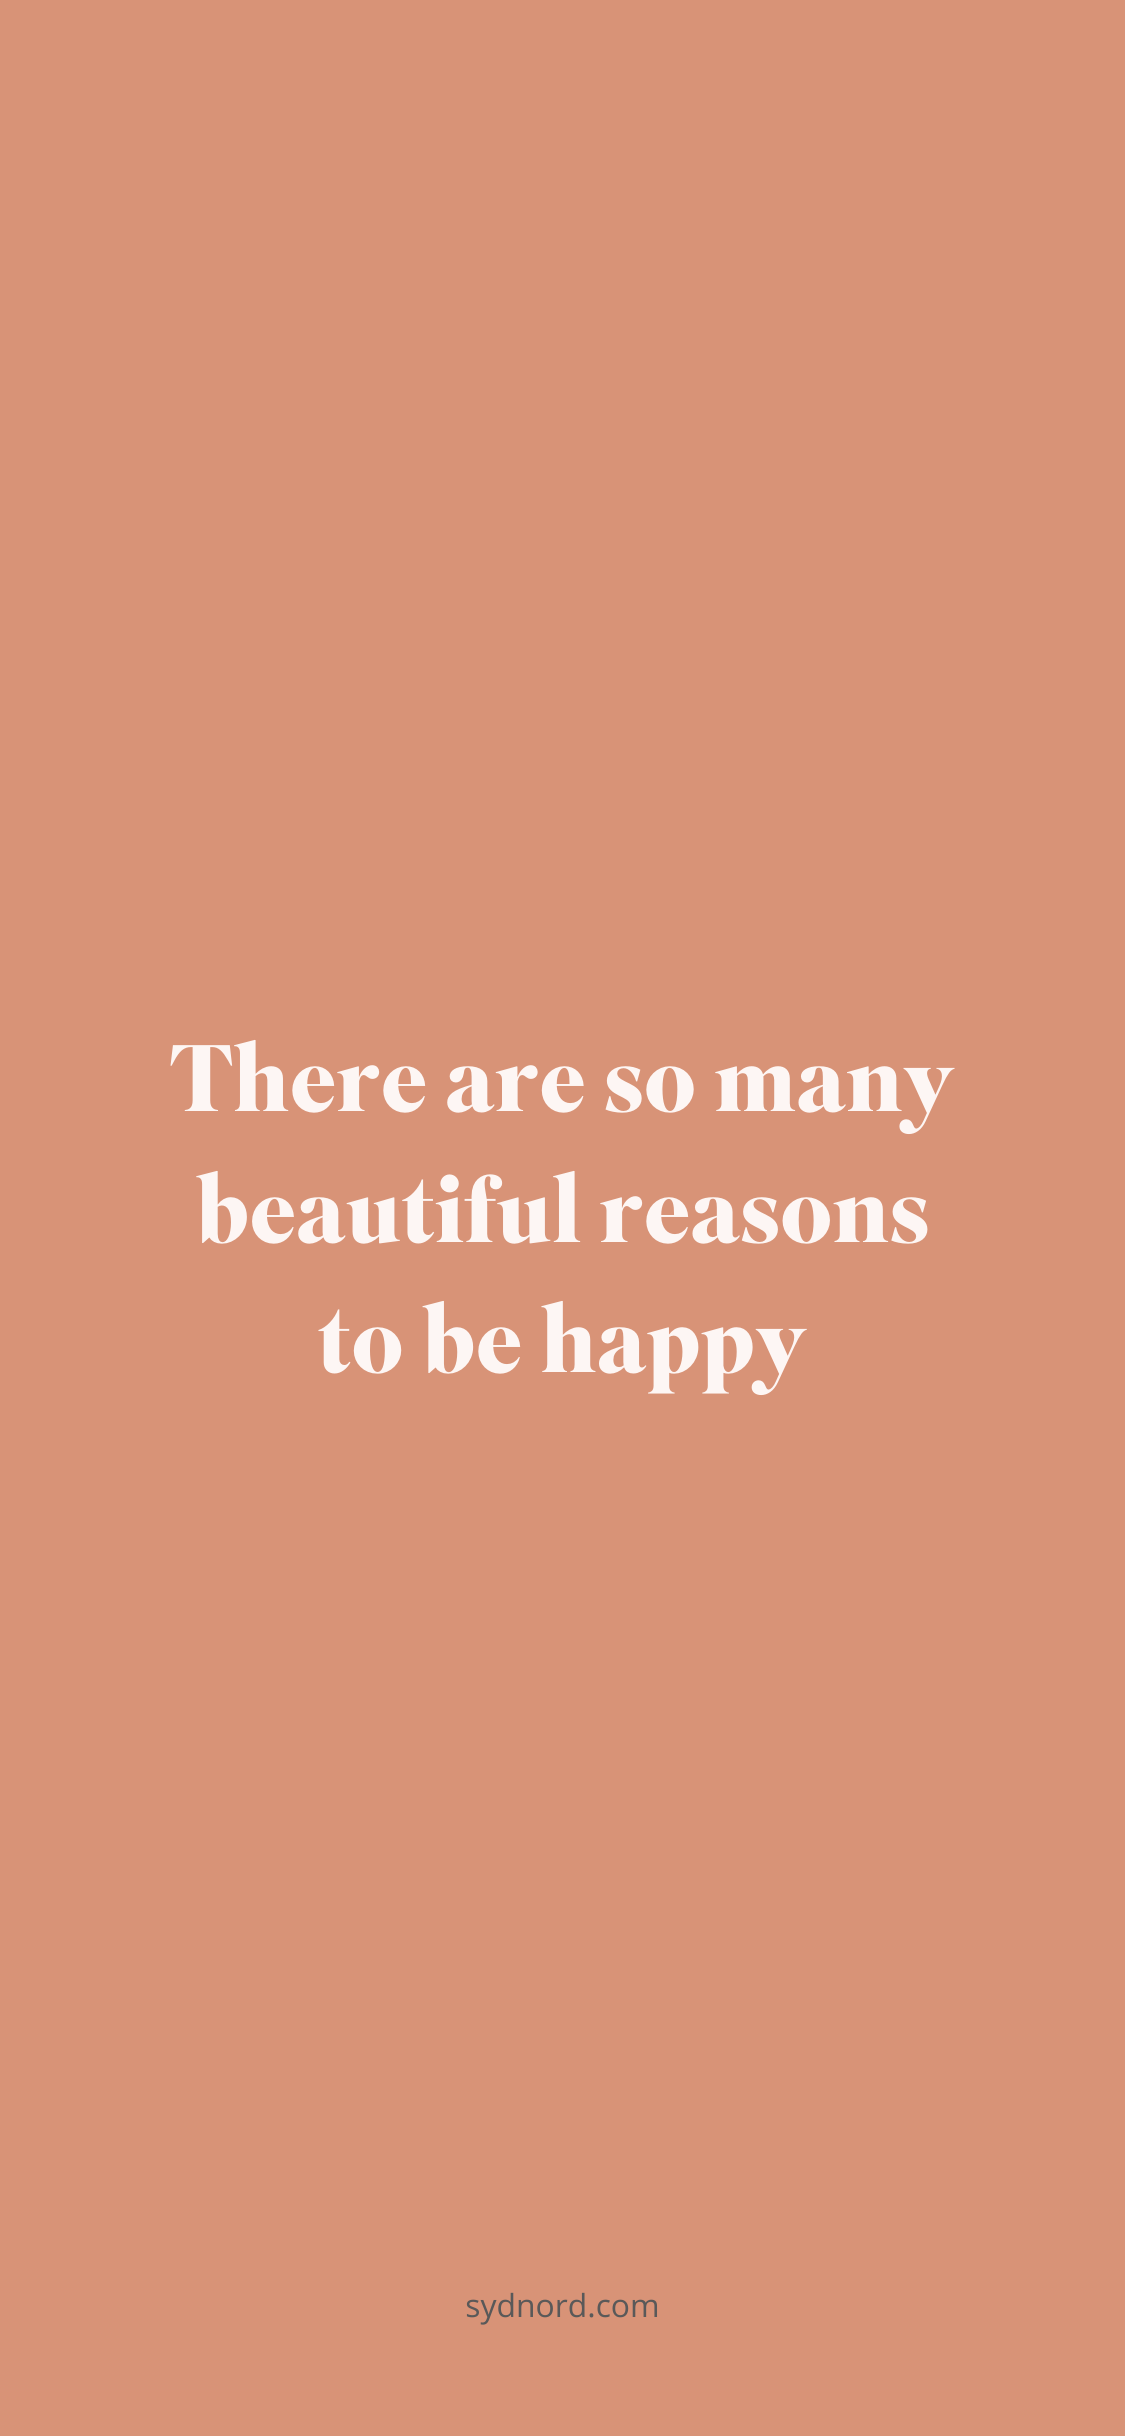 Positive quote and so true — There are so many beautiful reasons to be happy